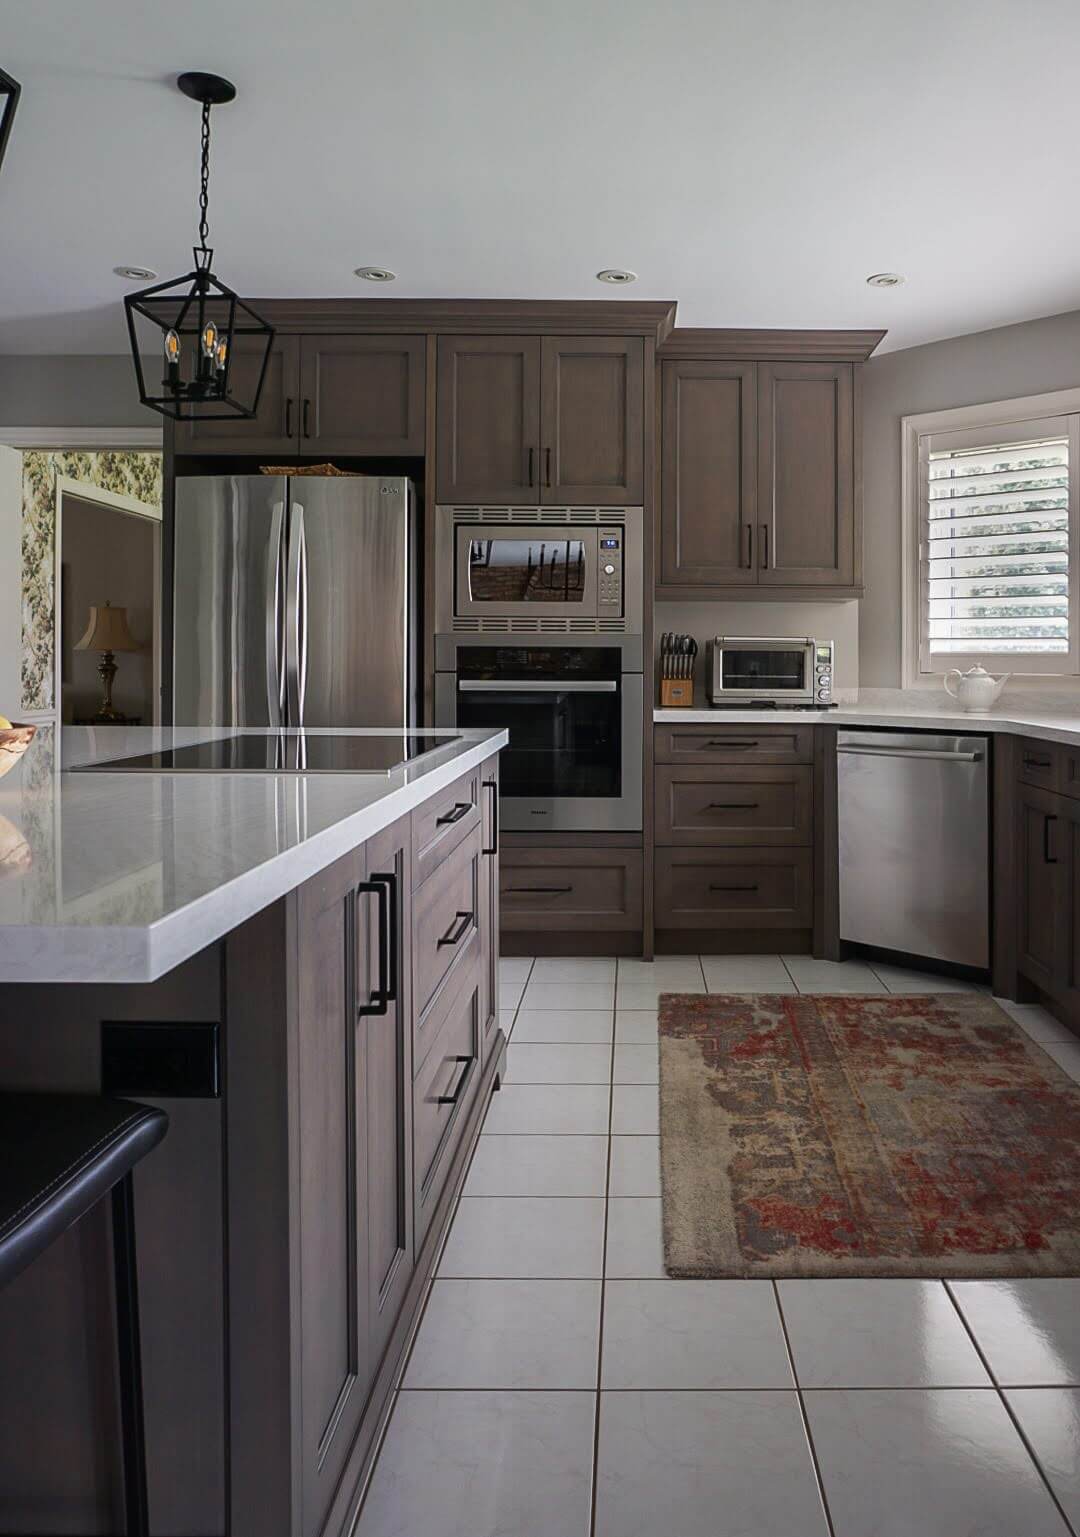 Sideview of a renovated kitchen with white marble island countertop, silver appliances, and brown wooden cabinets and decorative rug